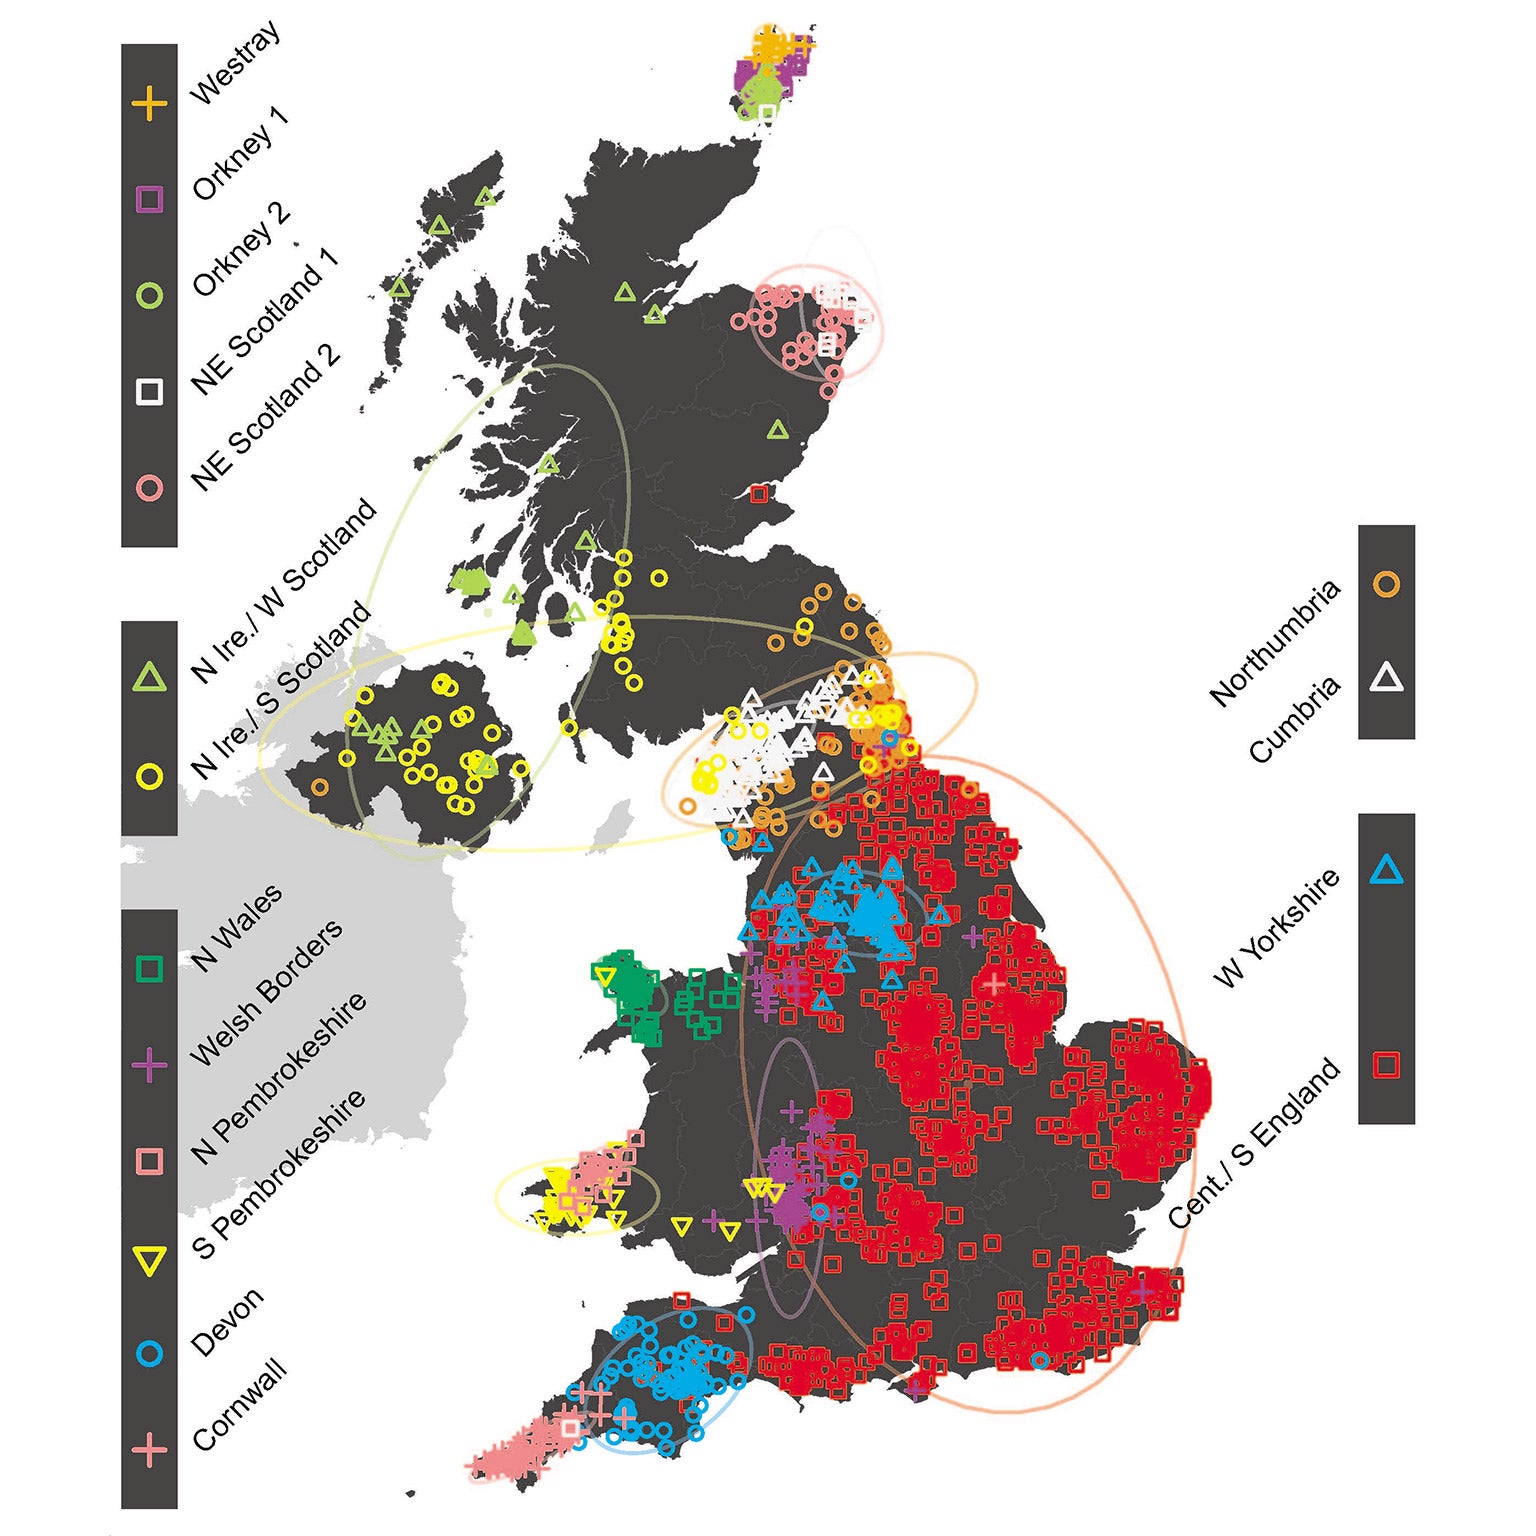 Map of the UK showing population clustering based on genetics, and its striking relationship with geography. Each of the genetic clusters is represented by a different symbol (combining shape and colour, with legend at the sides). The ellipses give a sens